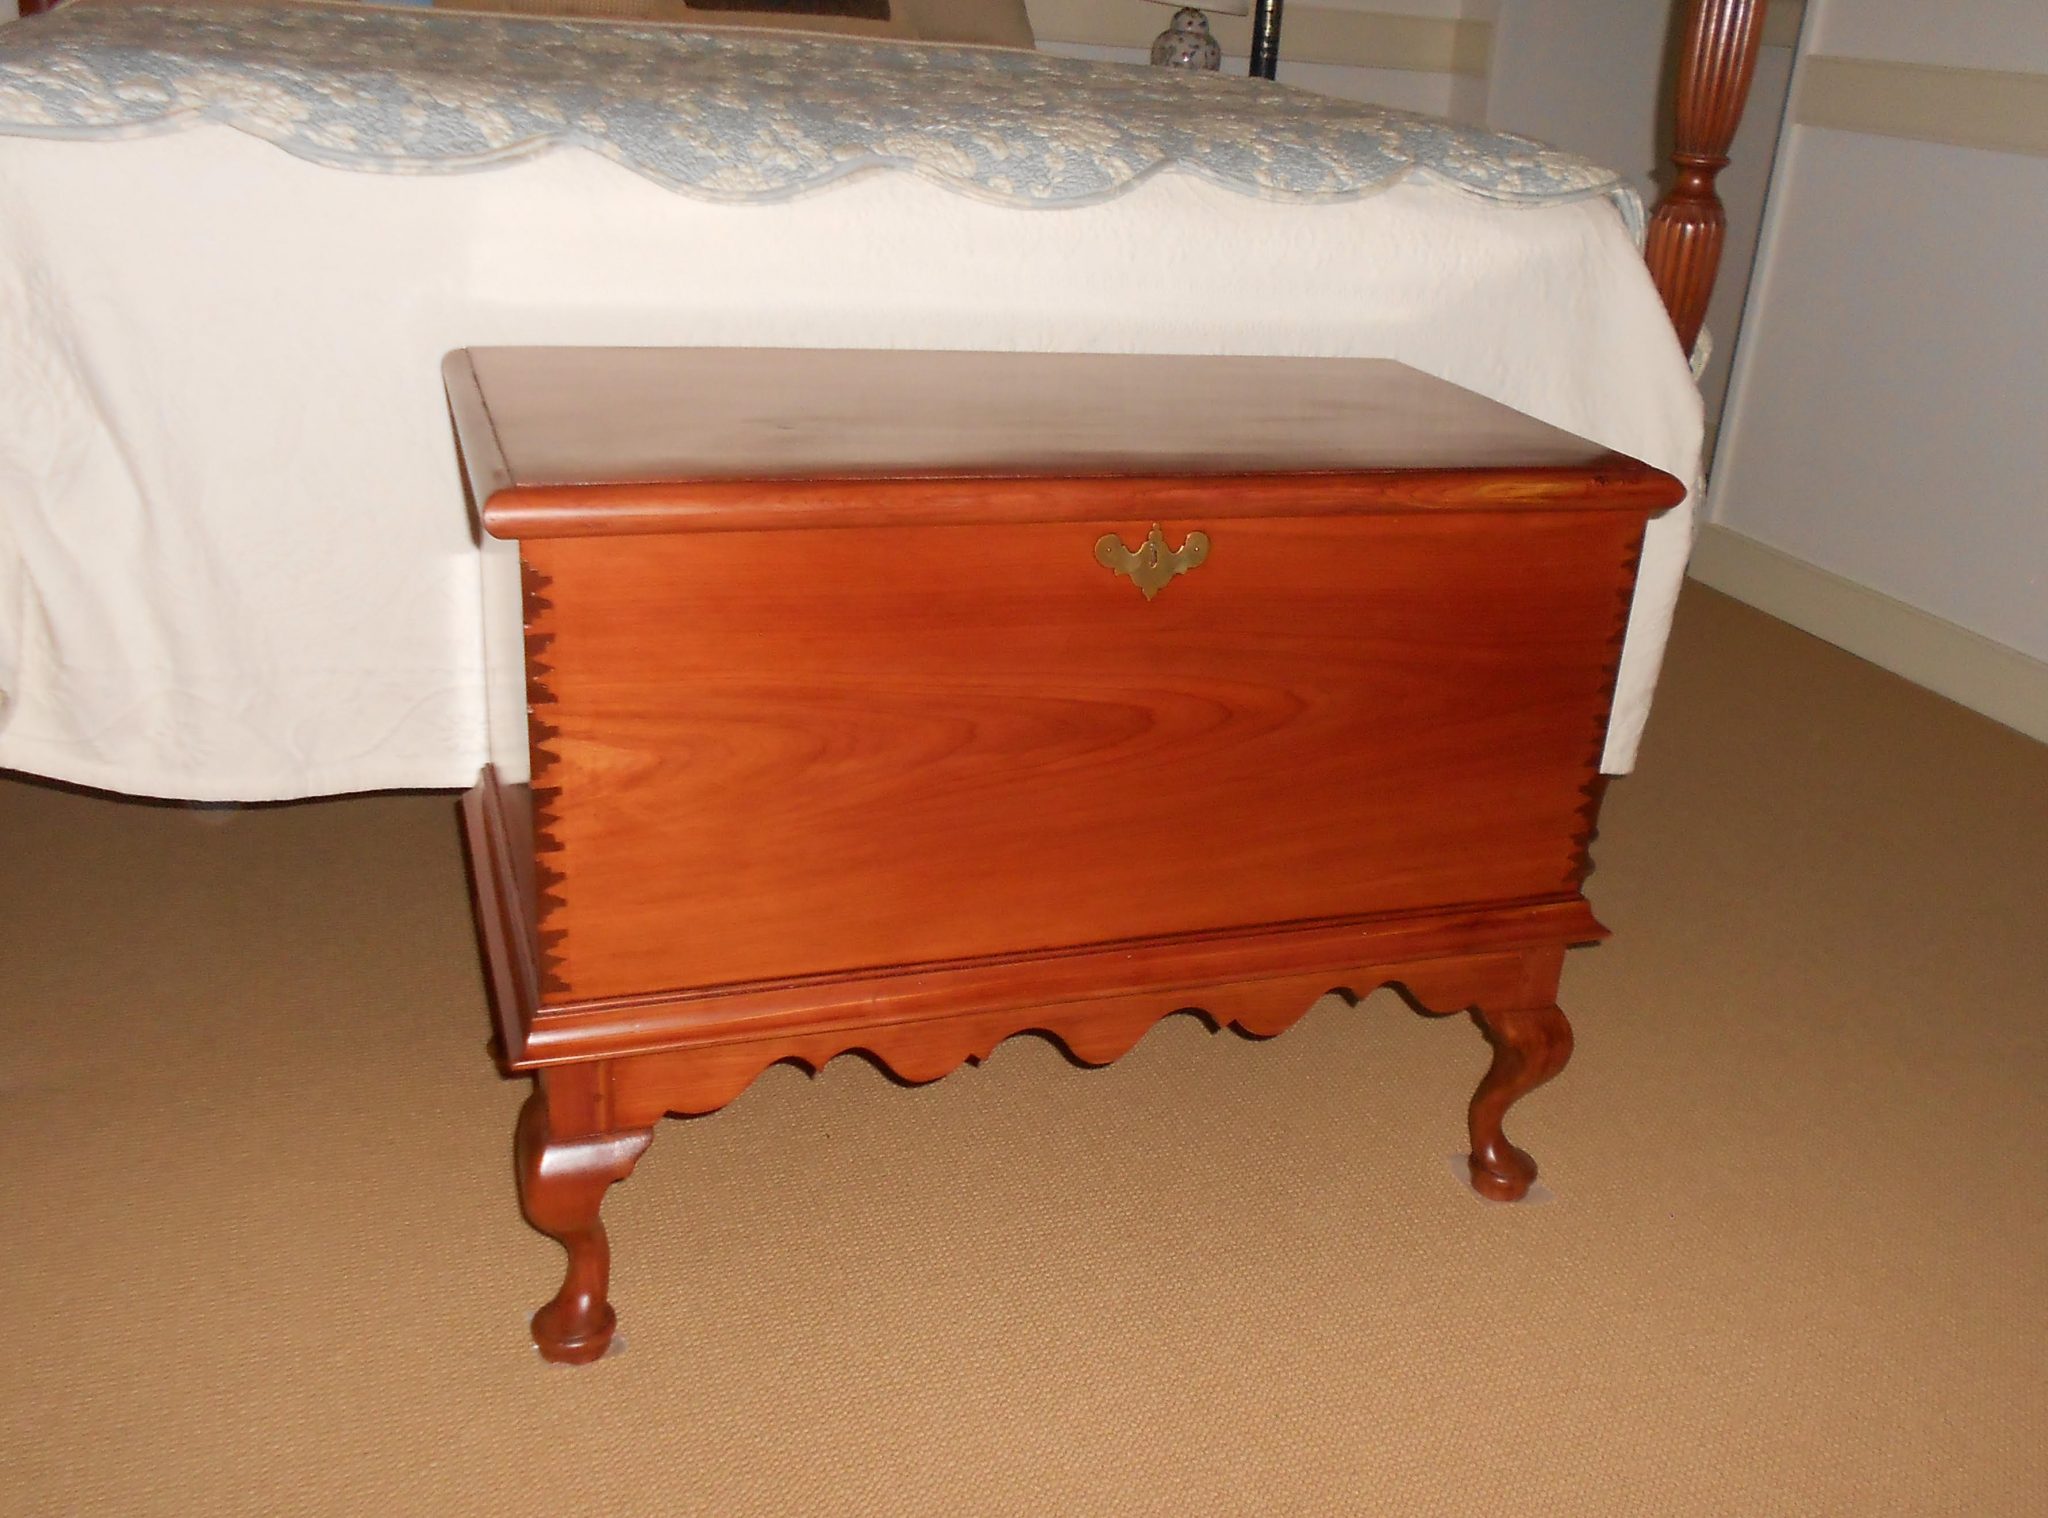 Wide board cedar chest with custom Bermuda style and dovetails made with traditions tools.